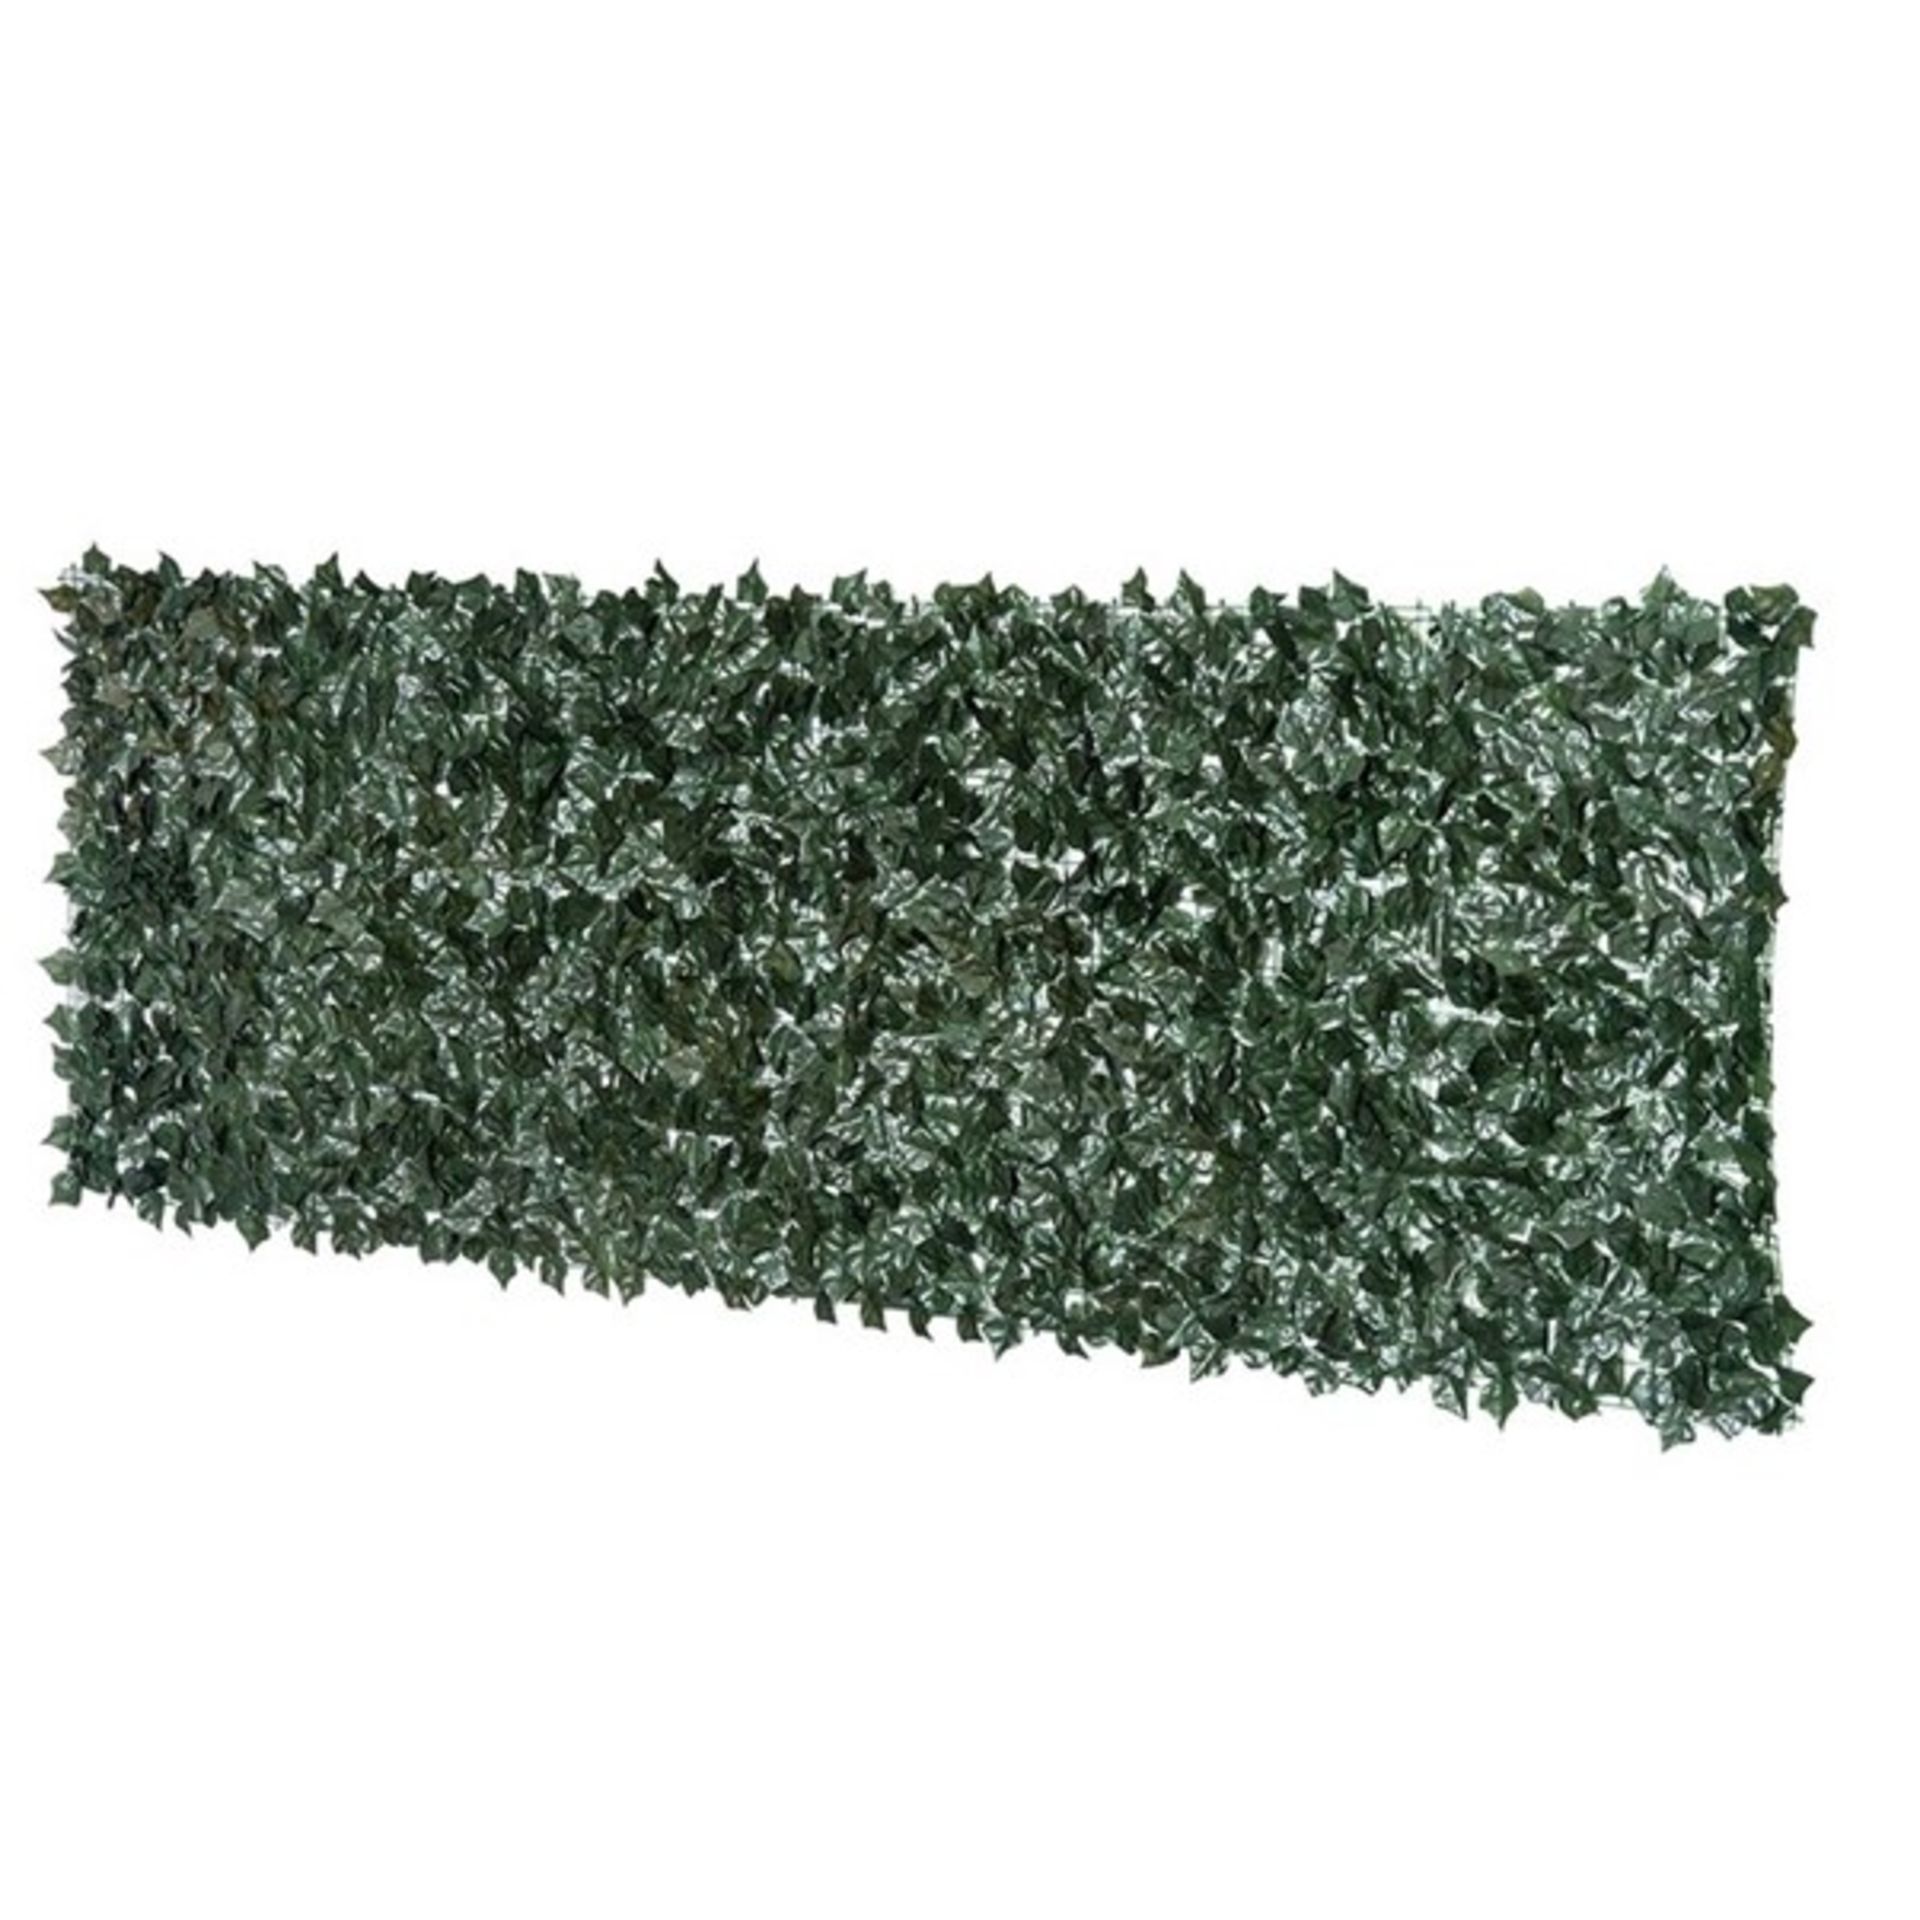 RRP £38.99 - Aaliah 3m x 1m Privacy Fencing Hedge - 300cm W x 100cm H - Image 2 of 2